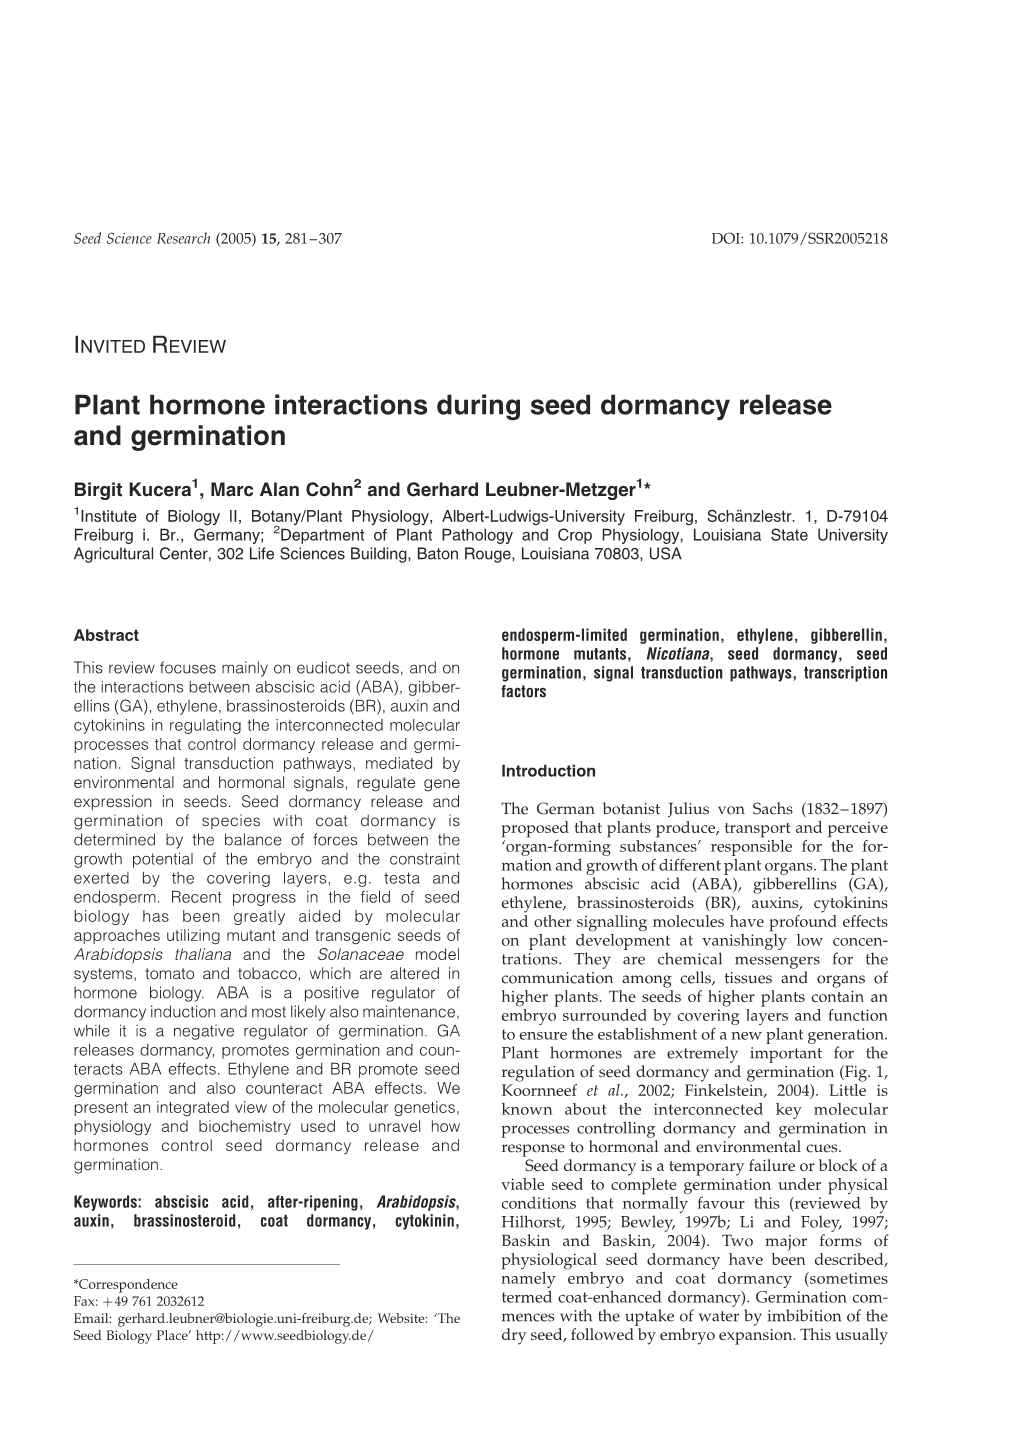 Plant Hormone Interactions During Seed Dormancy Release and Germination